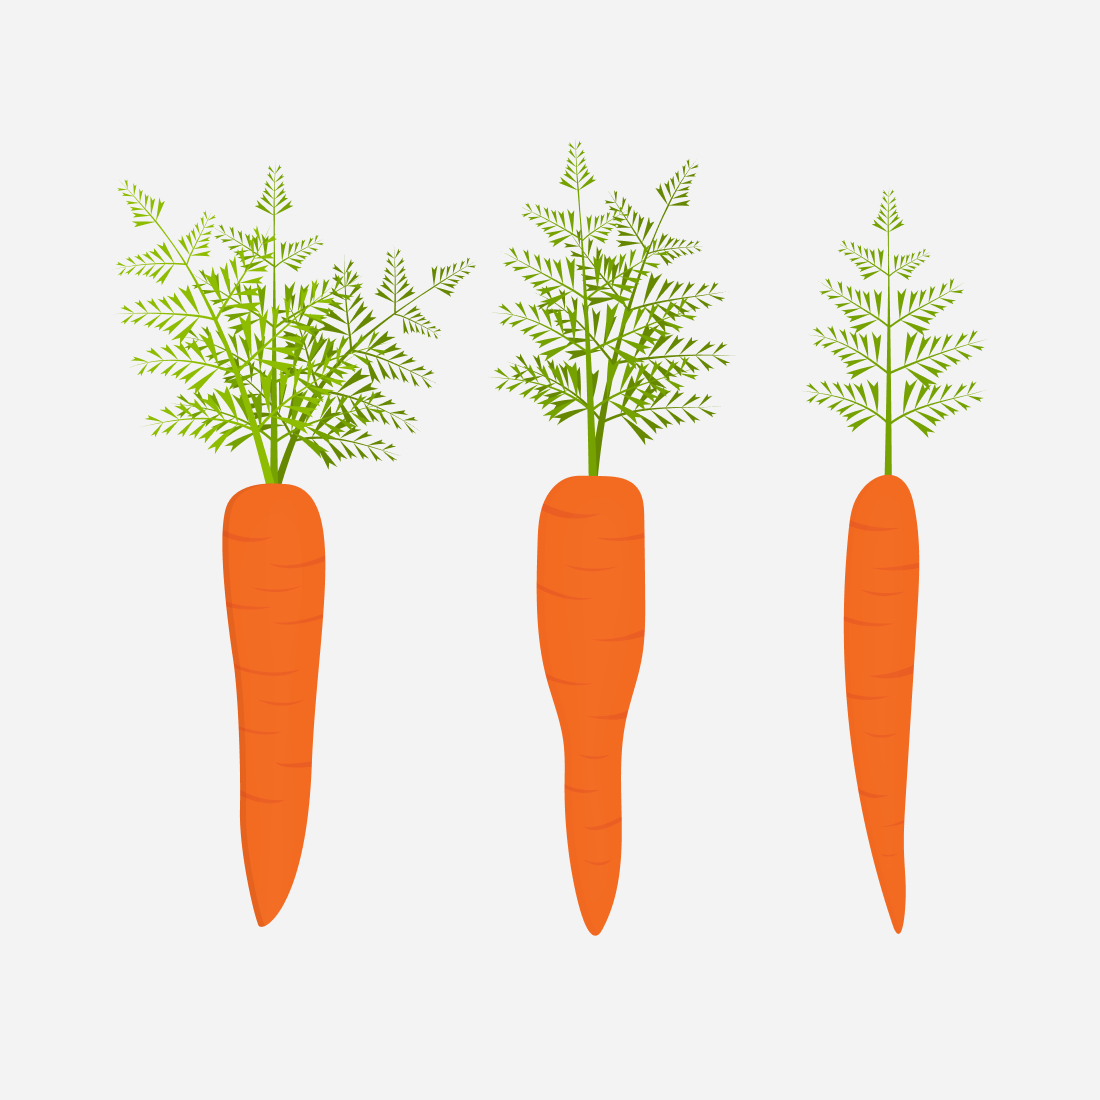 Three drawings of carrots on a gray background.